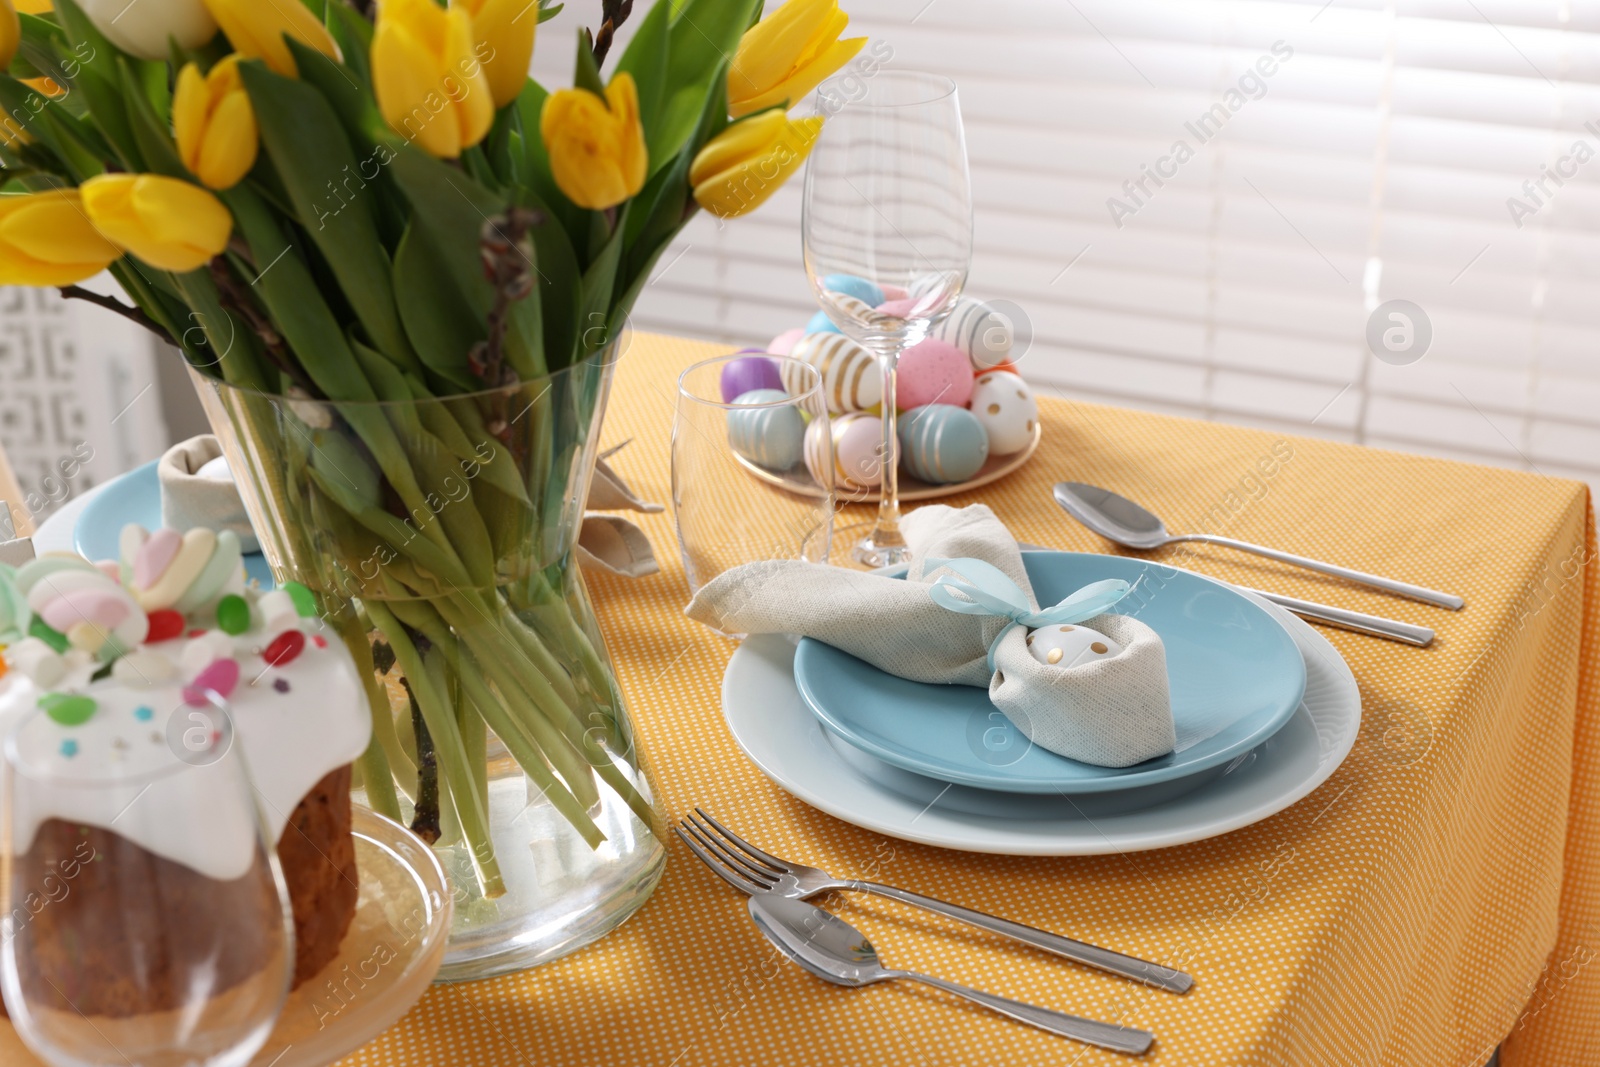 Photo of Festive table setting with painted eggs, cutlery and vase of tulips. Easter celebration